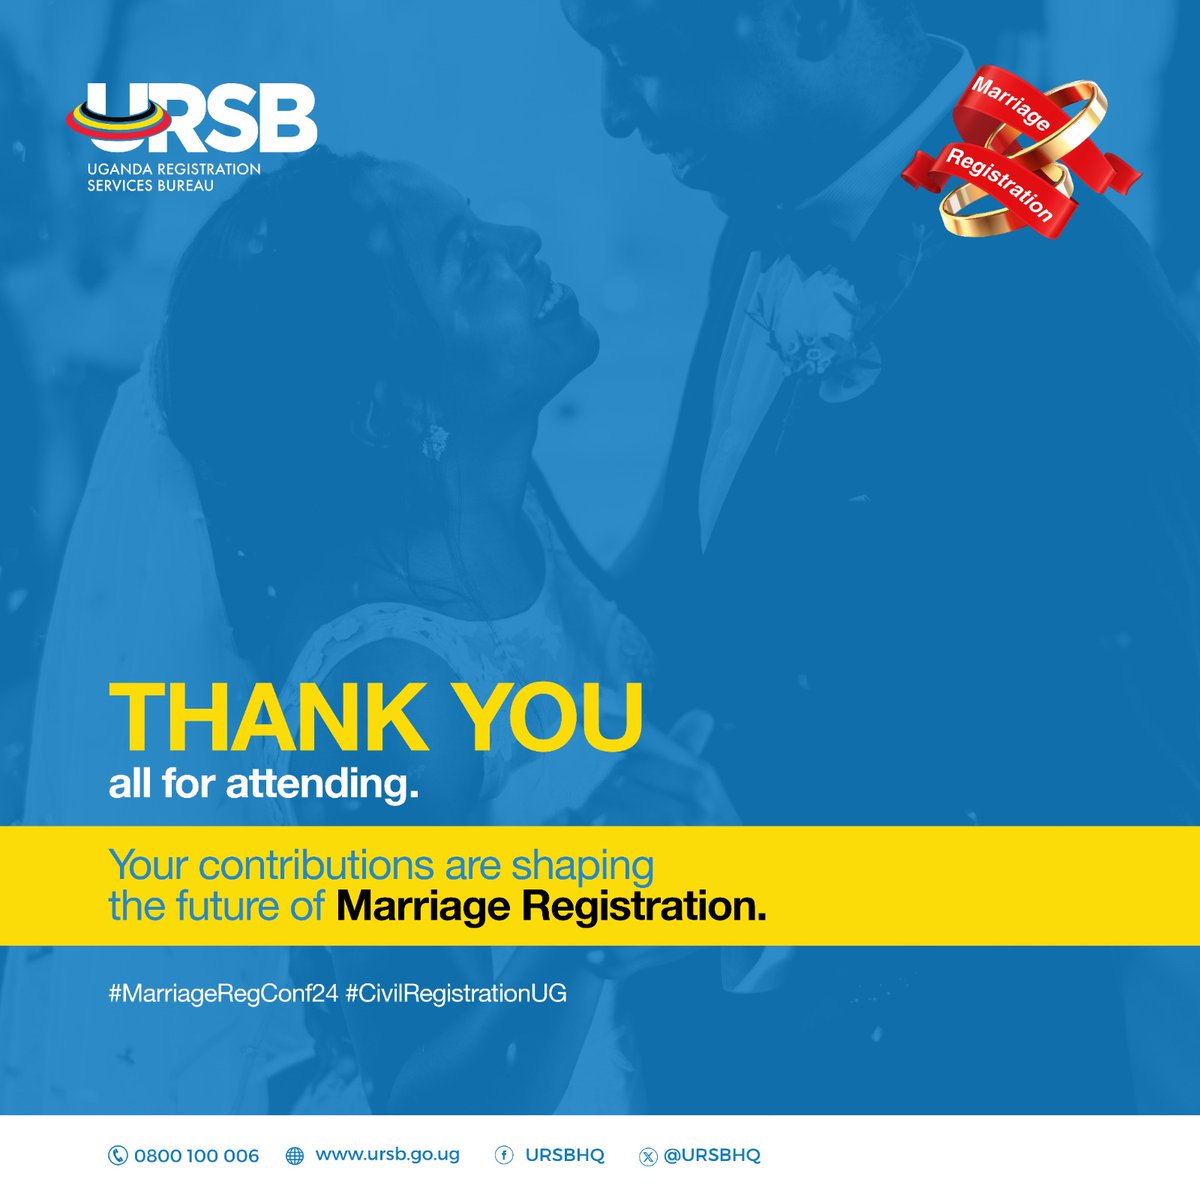 Thank you to everyone who attended our first Marriage Registration Conference. #MarriageRegConf24 #CivilRegistrationUG